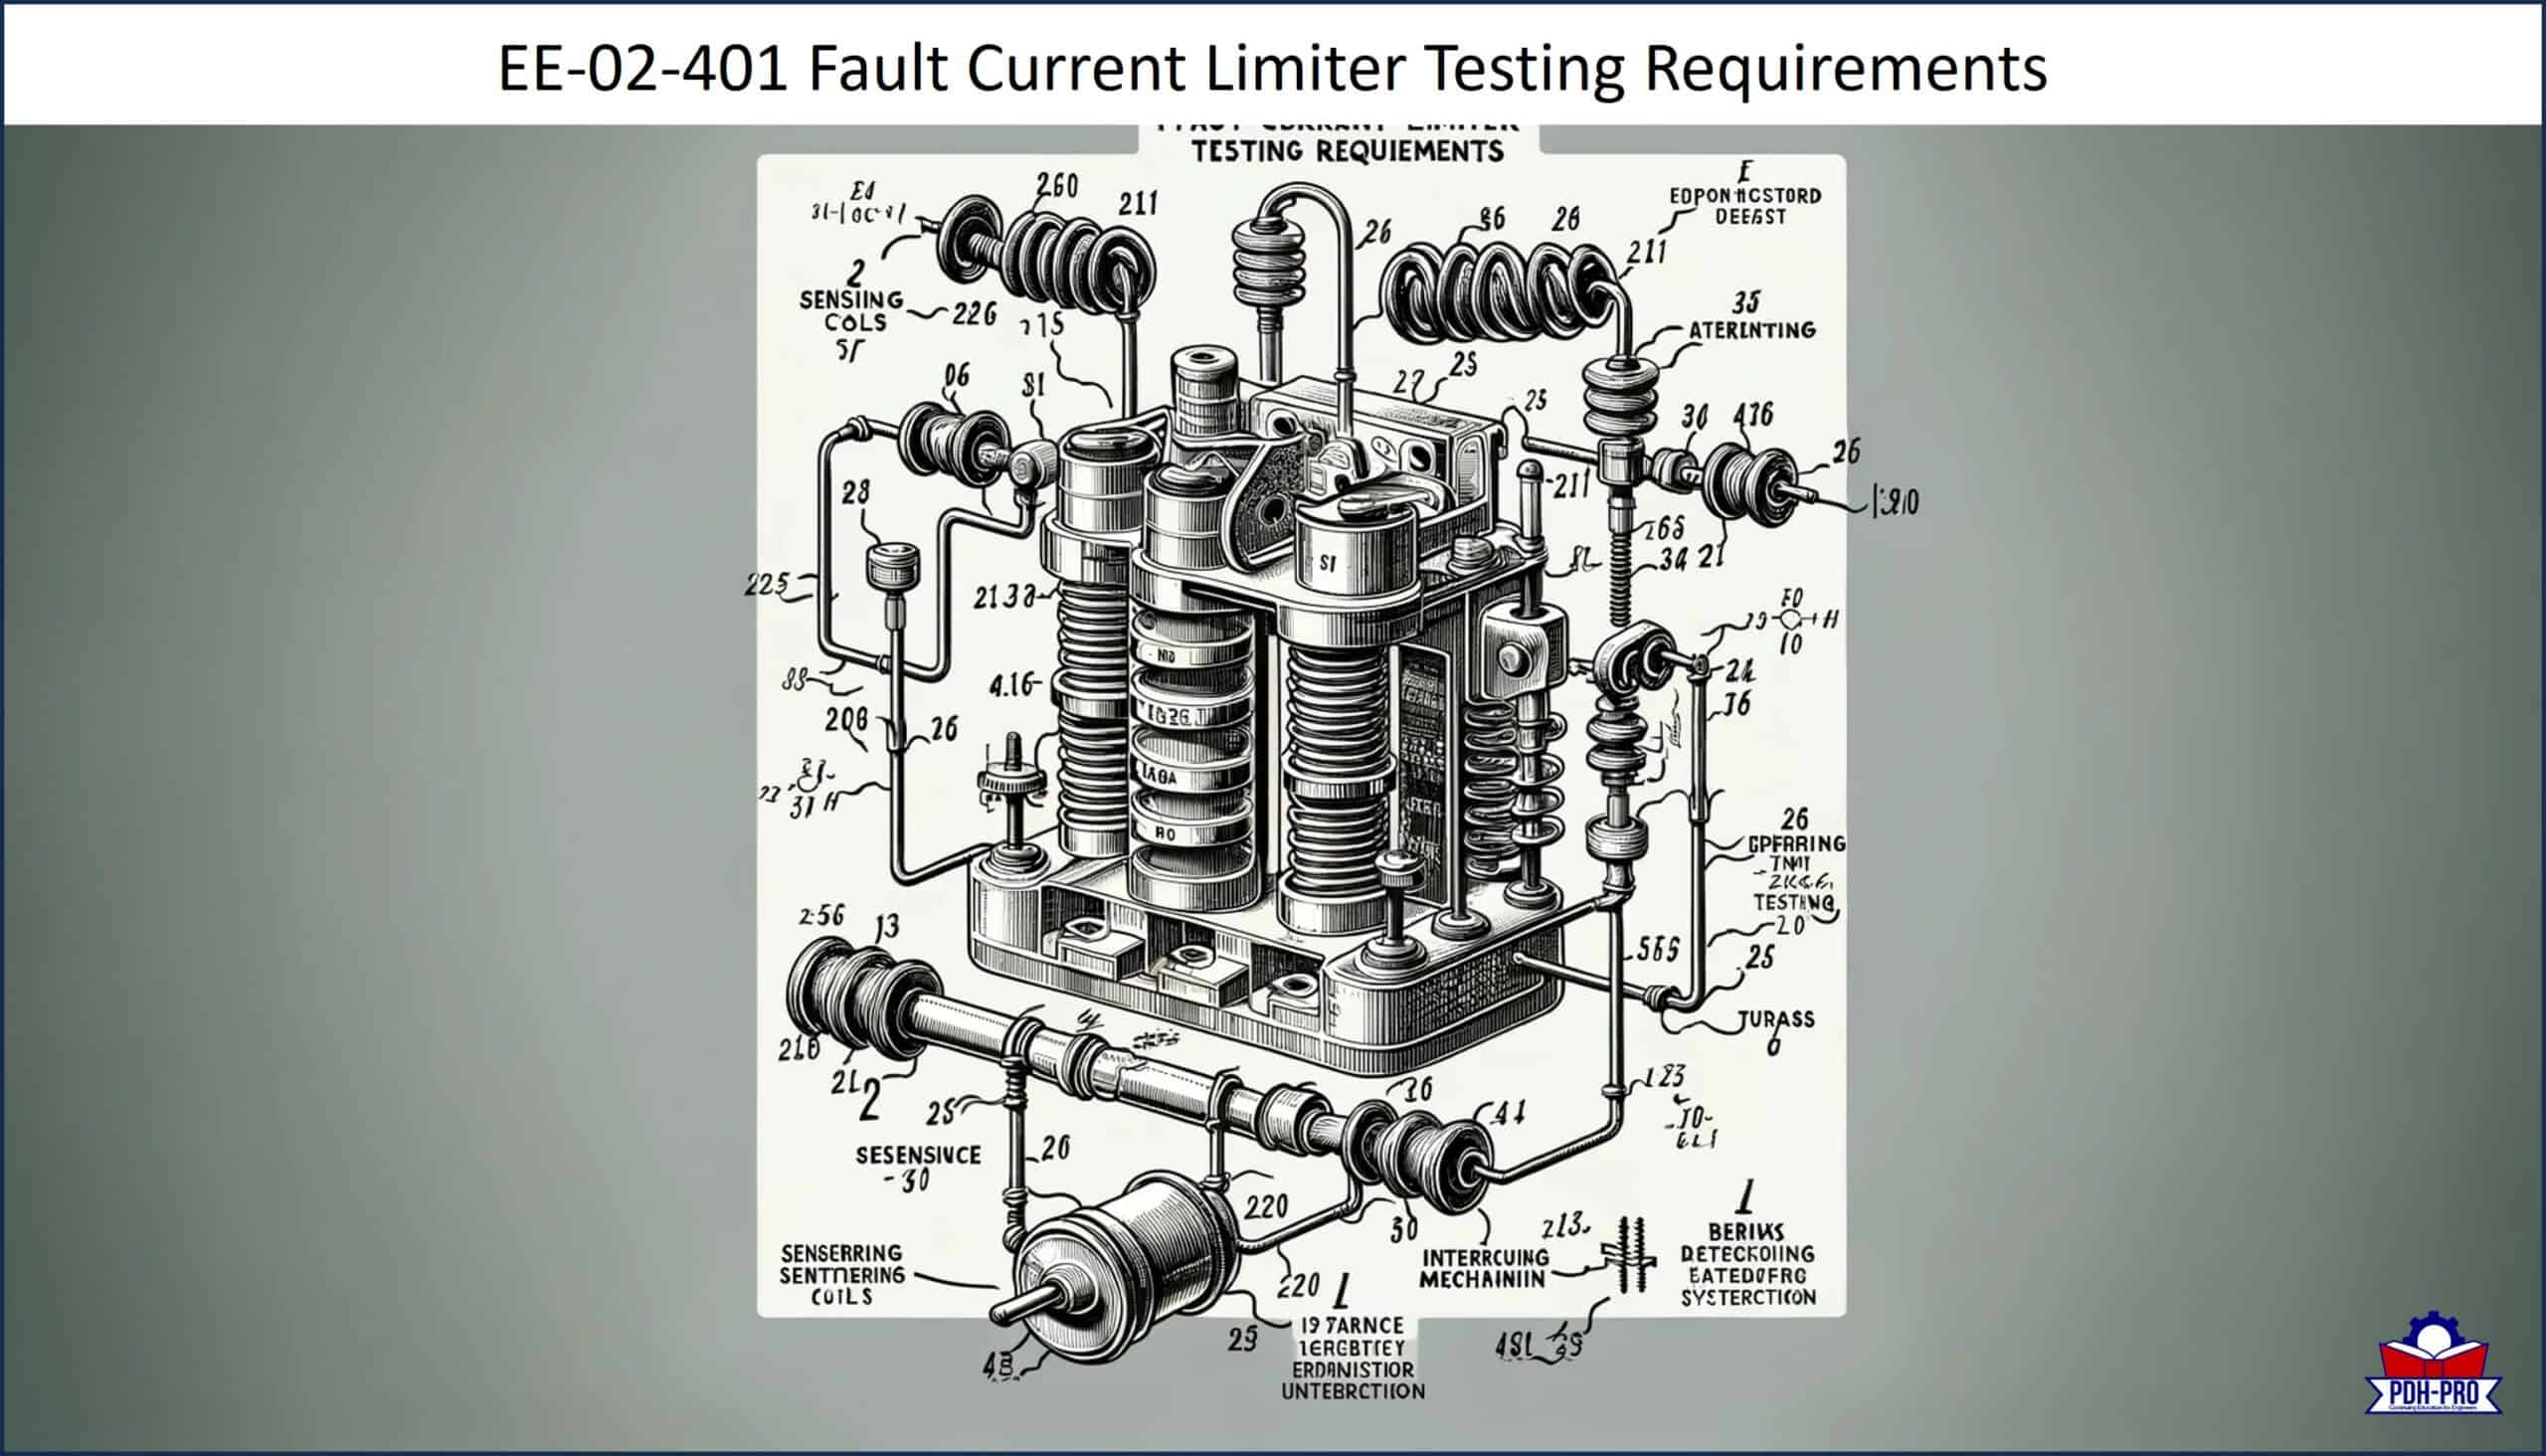 Fault Current Limiter Testing Requirements